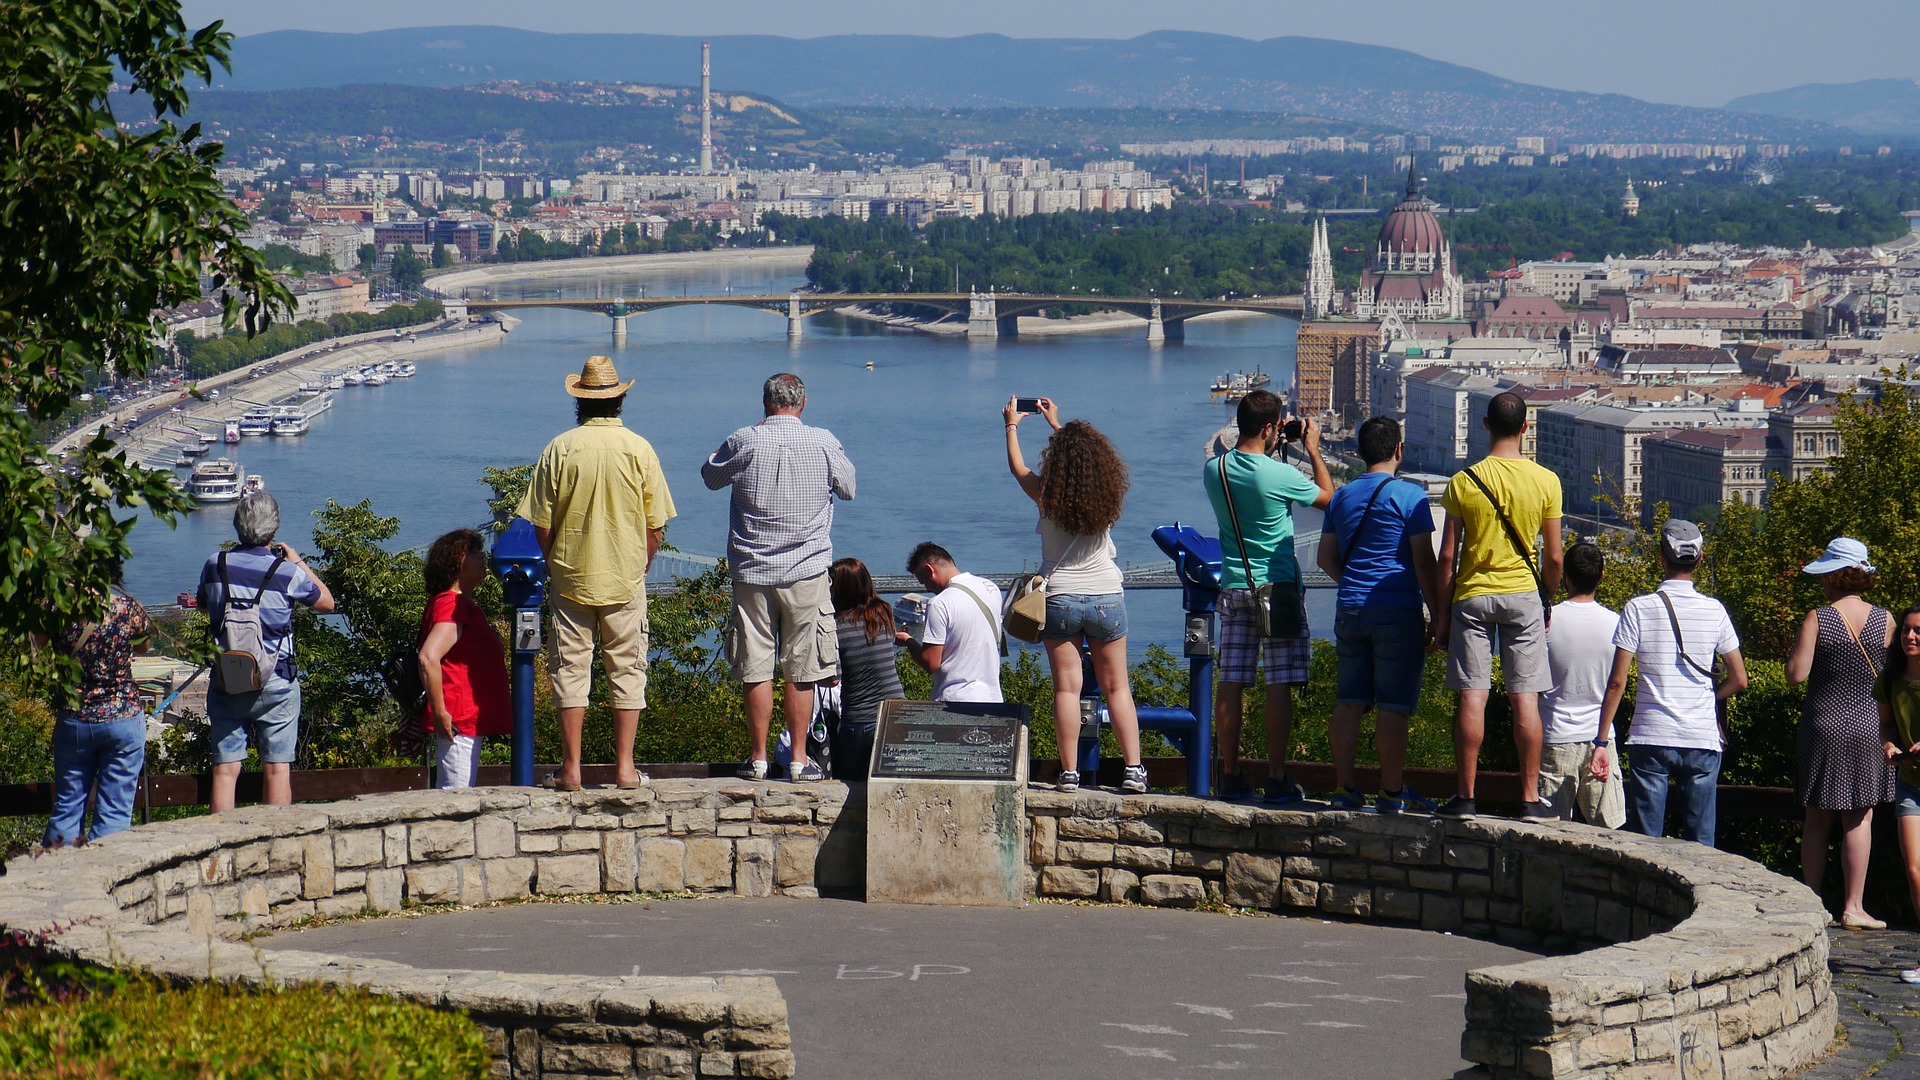 Gellért Hill, overlooking the Danube River in Budapest, Hungary